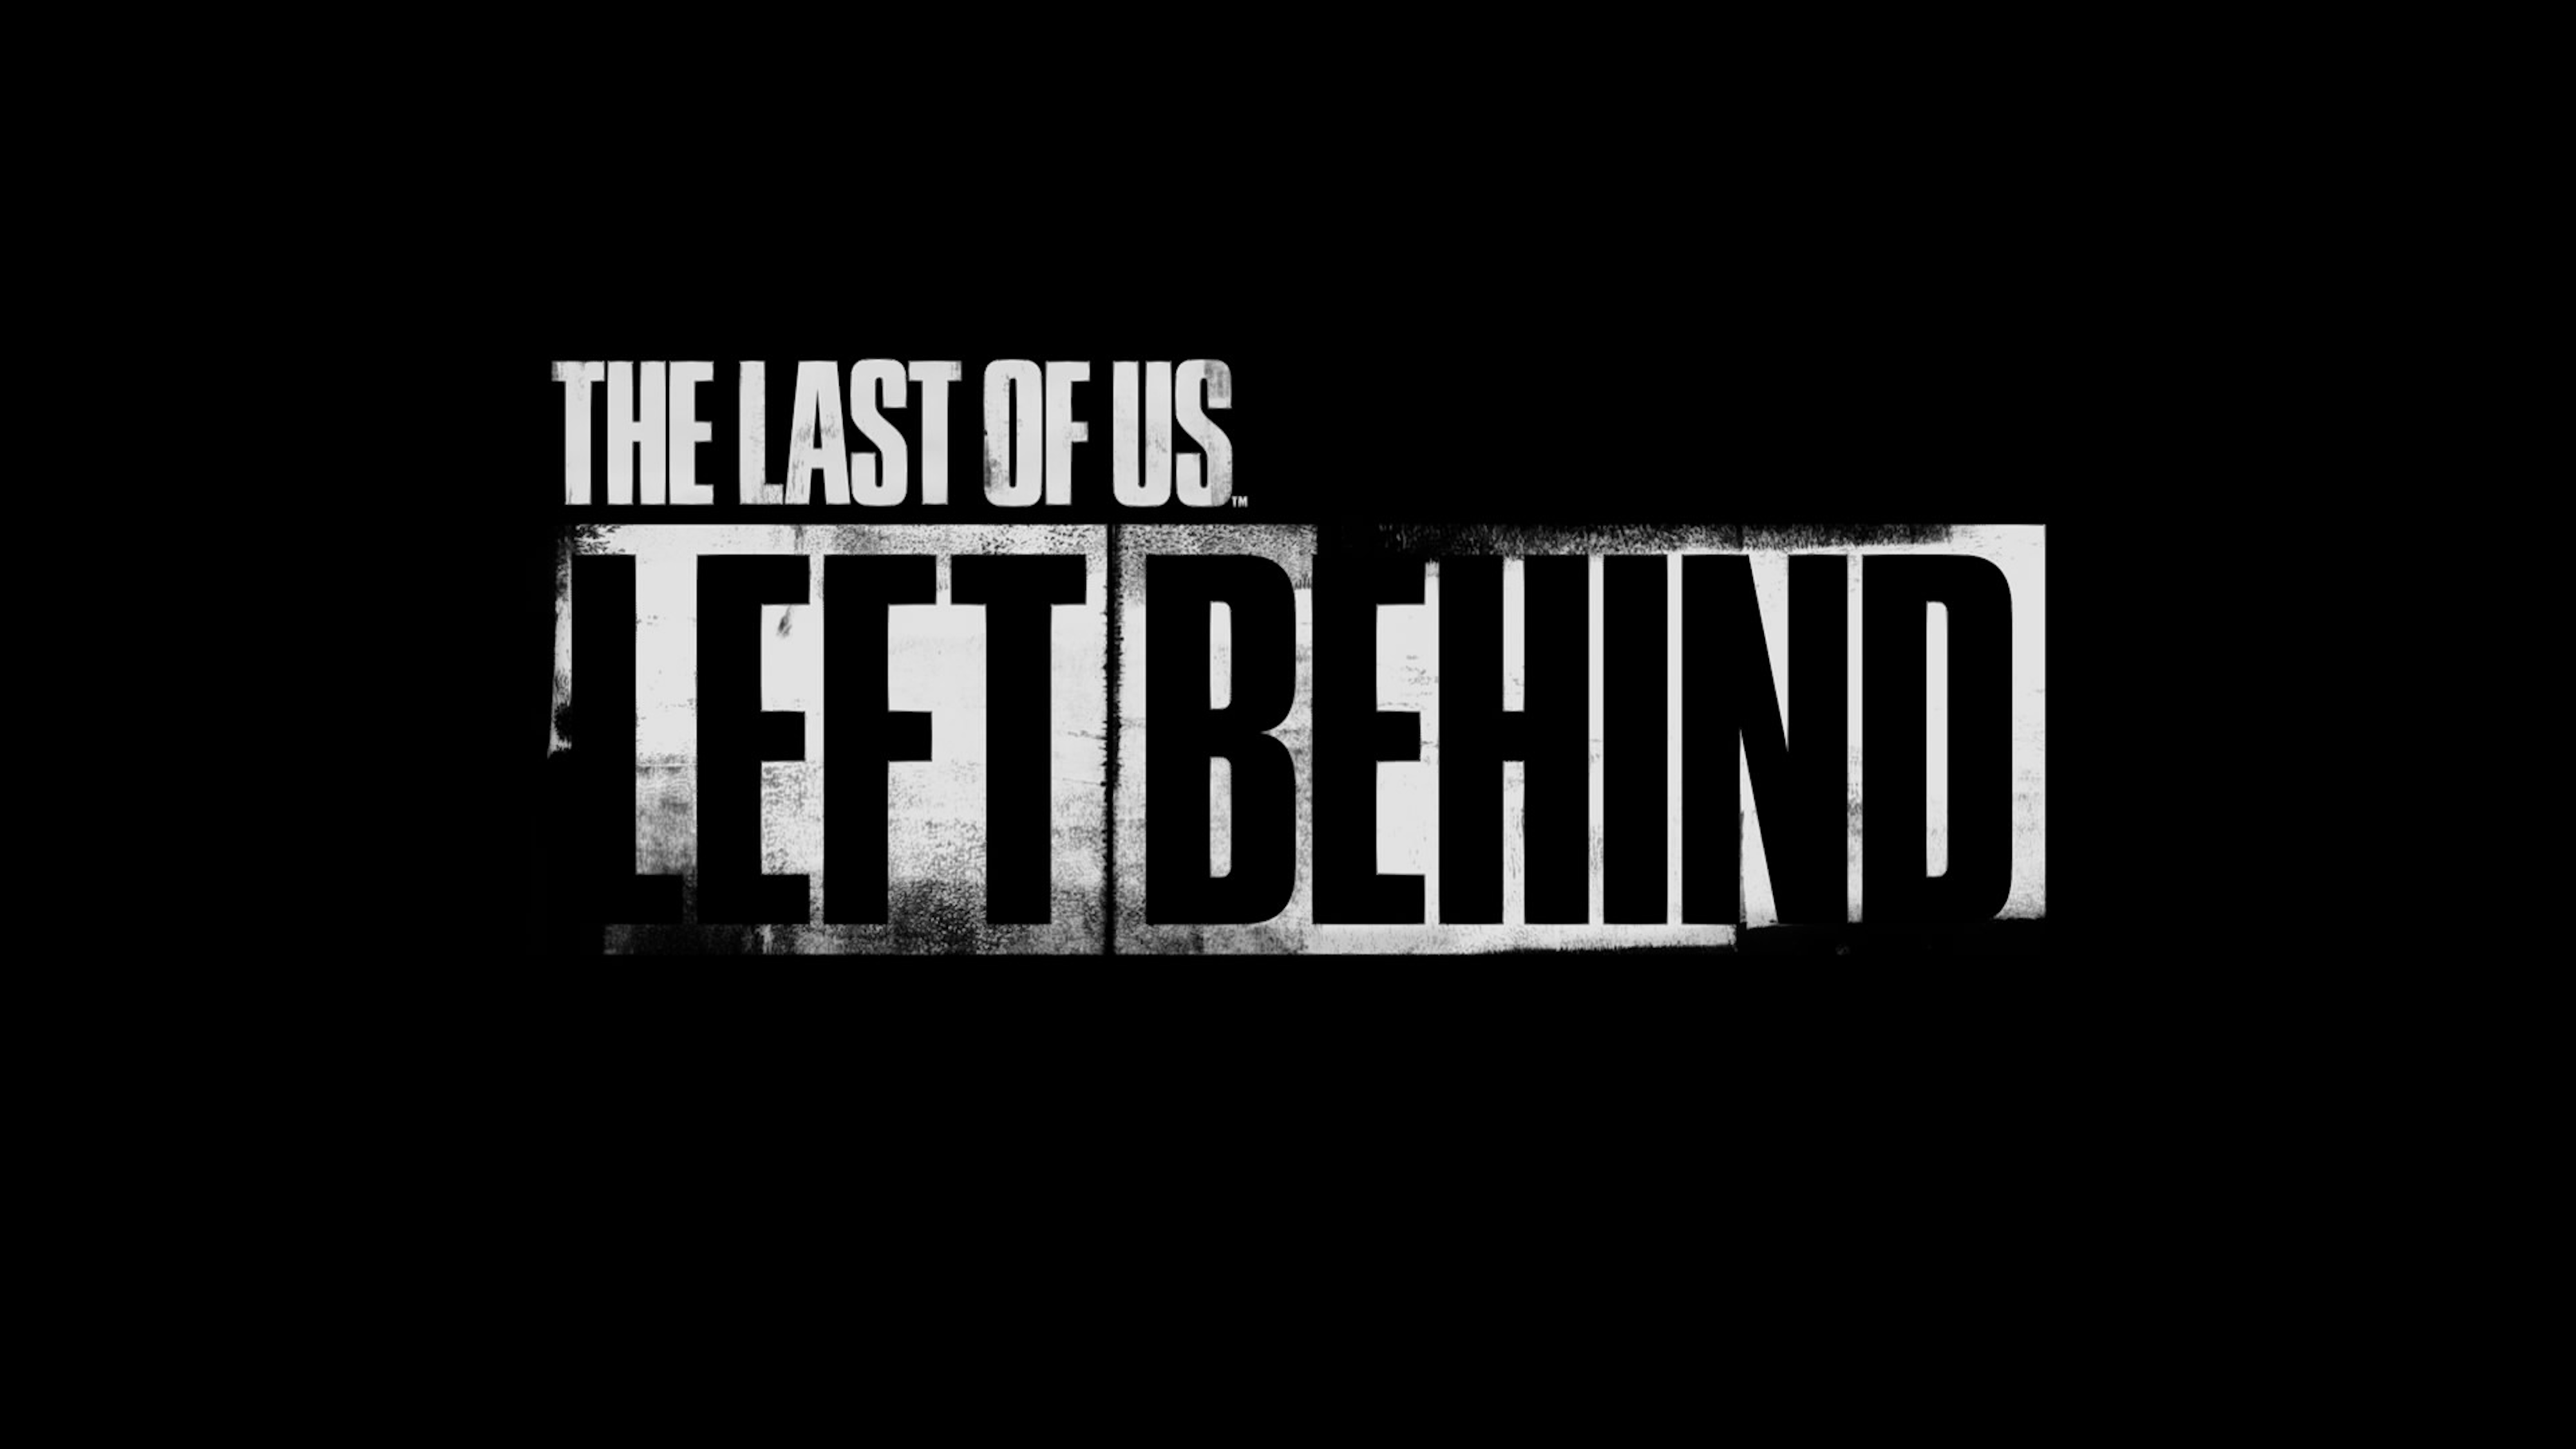 The Last of Us Left Behind ویکی The Last of Us فلاپسی